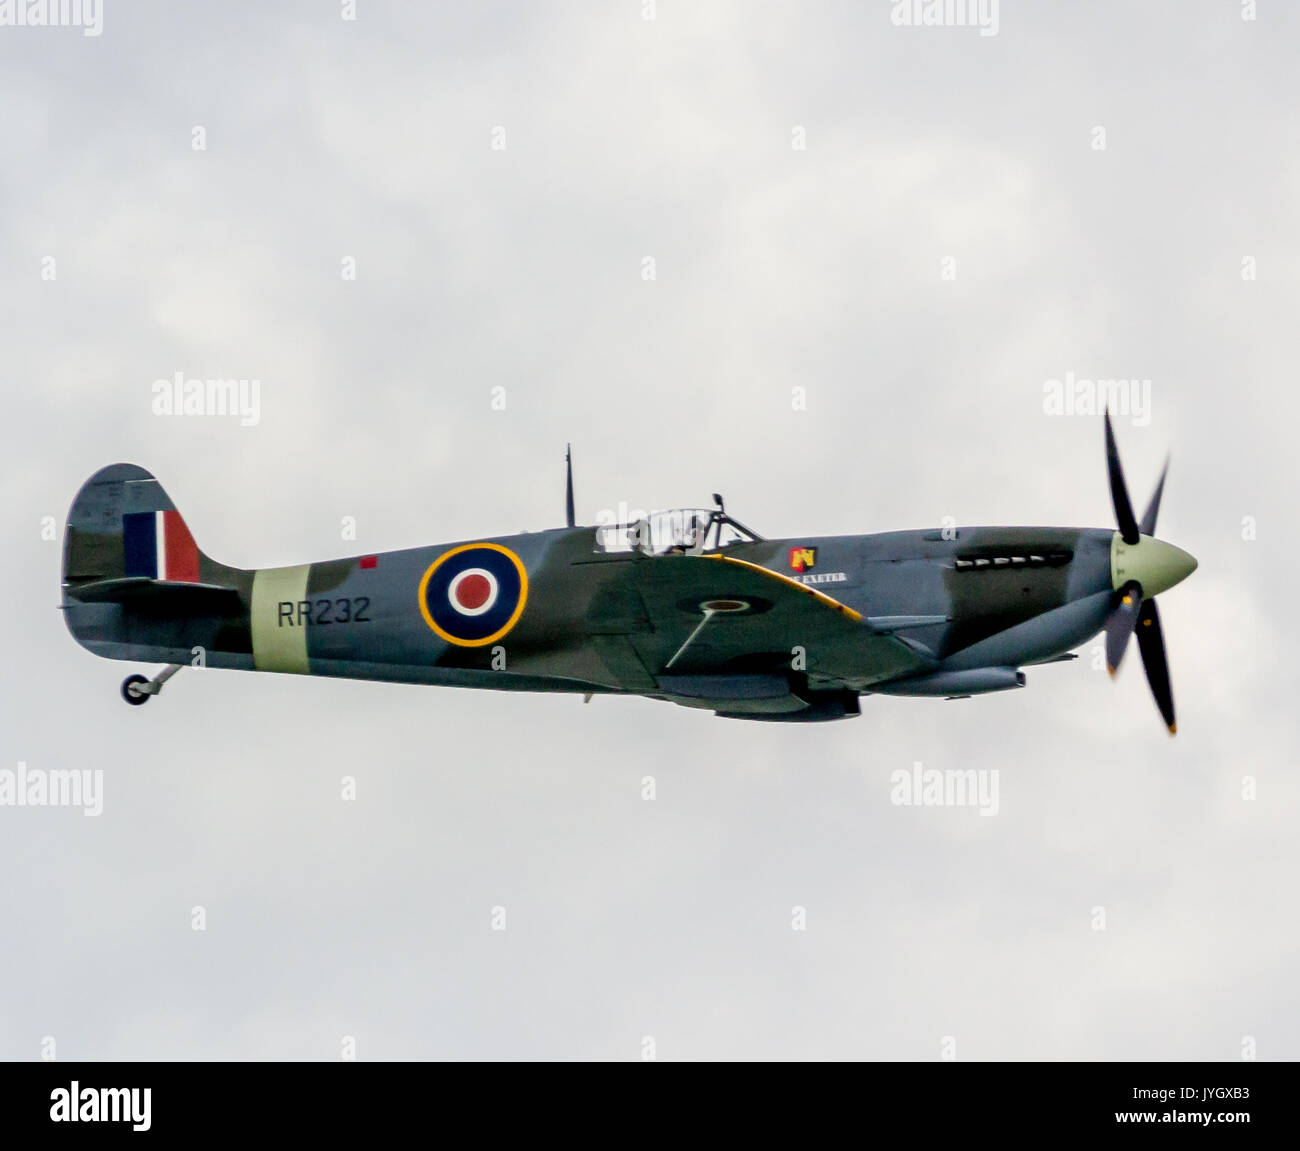 Eastbourne, East Sussex, United Kingdom. 18h August 2017. Spitfire dispaly at the 25th Eastbourne Airshow Credit: Alan Fraser/Alamy Live News Stock Photo